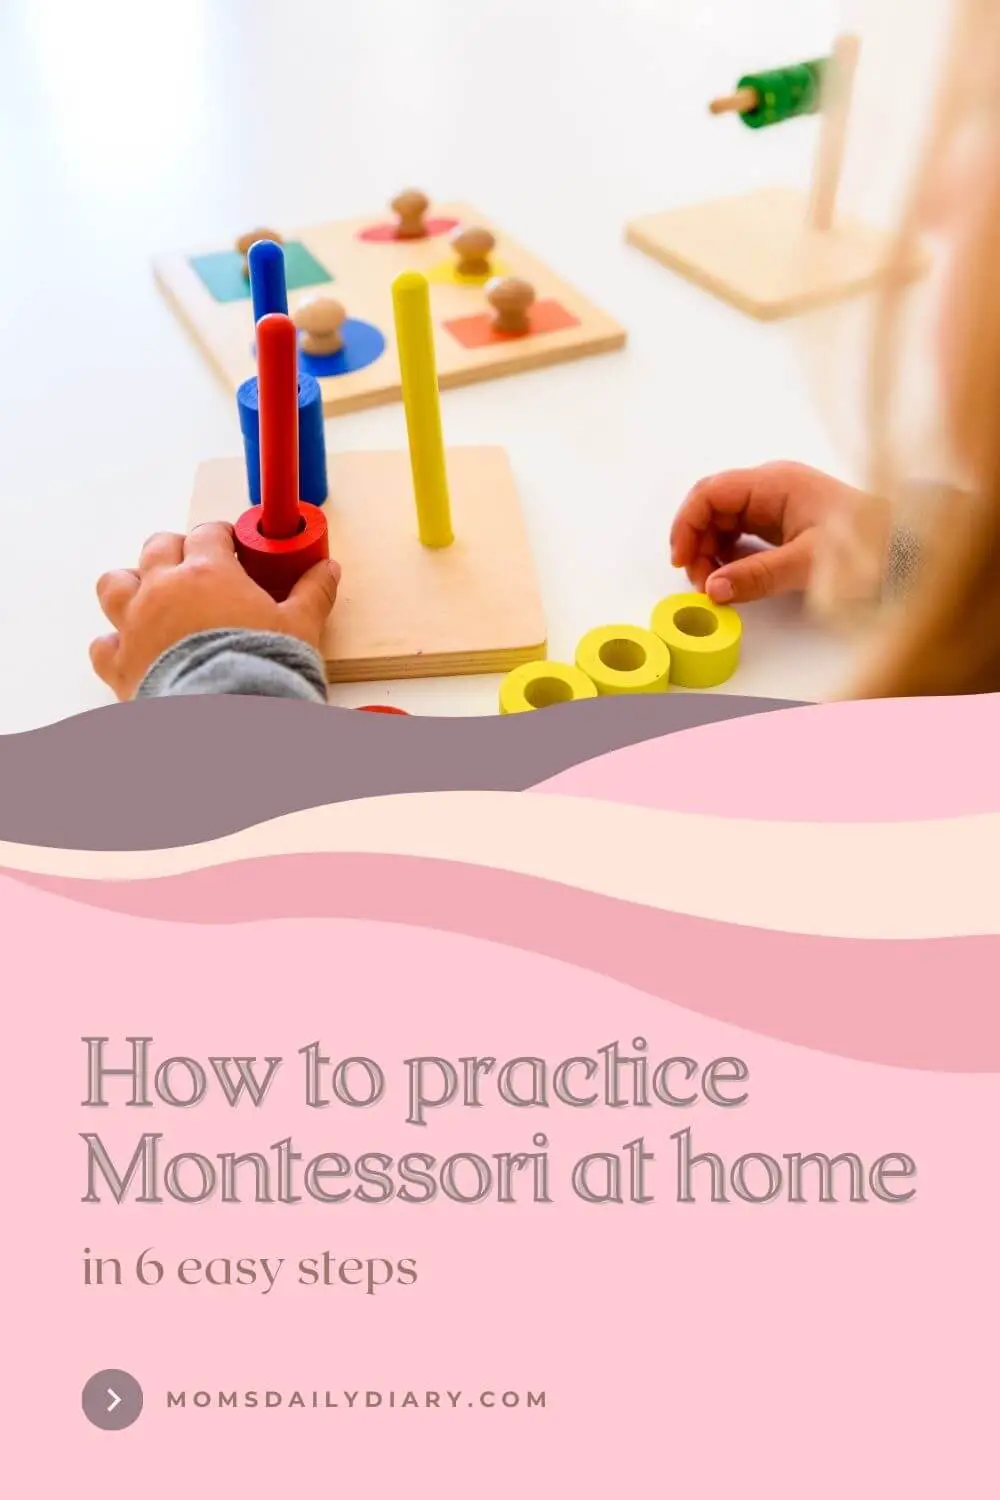 Pinterest pin with a image of a child playing with sorter and text "How to practice Montessori at home in 6 easy steps"